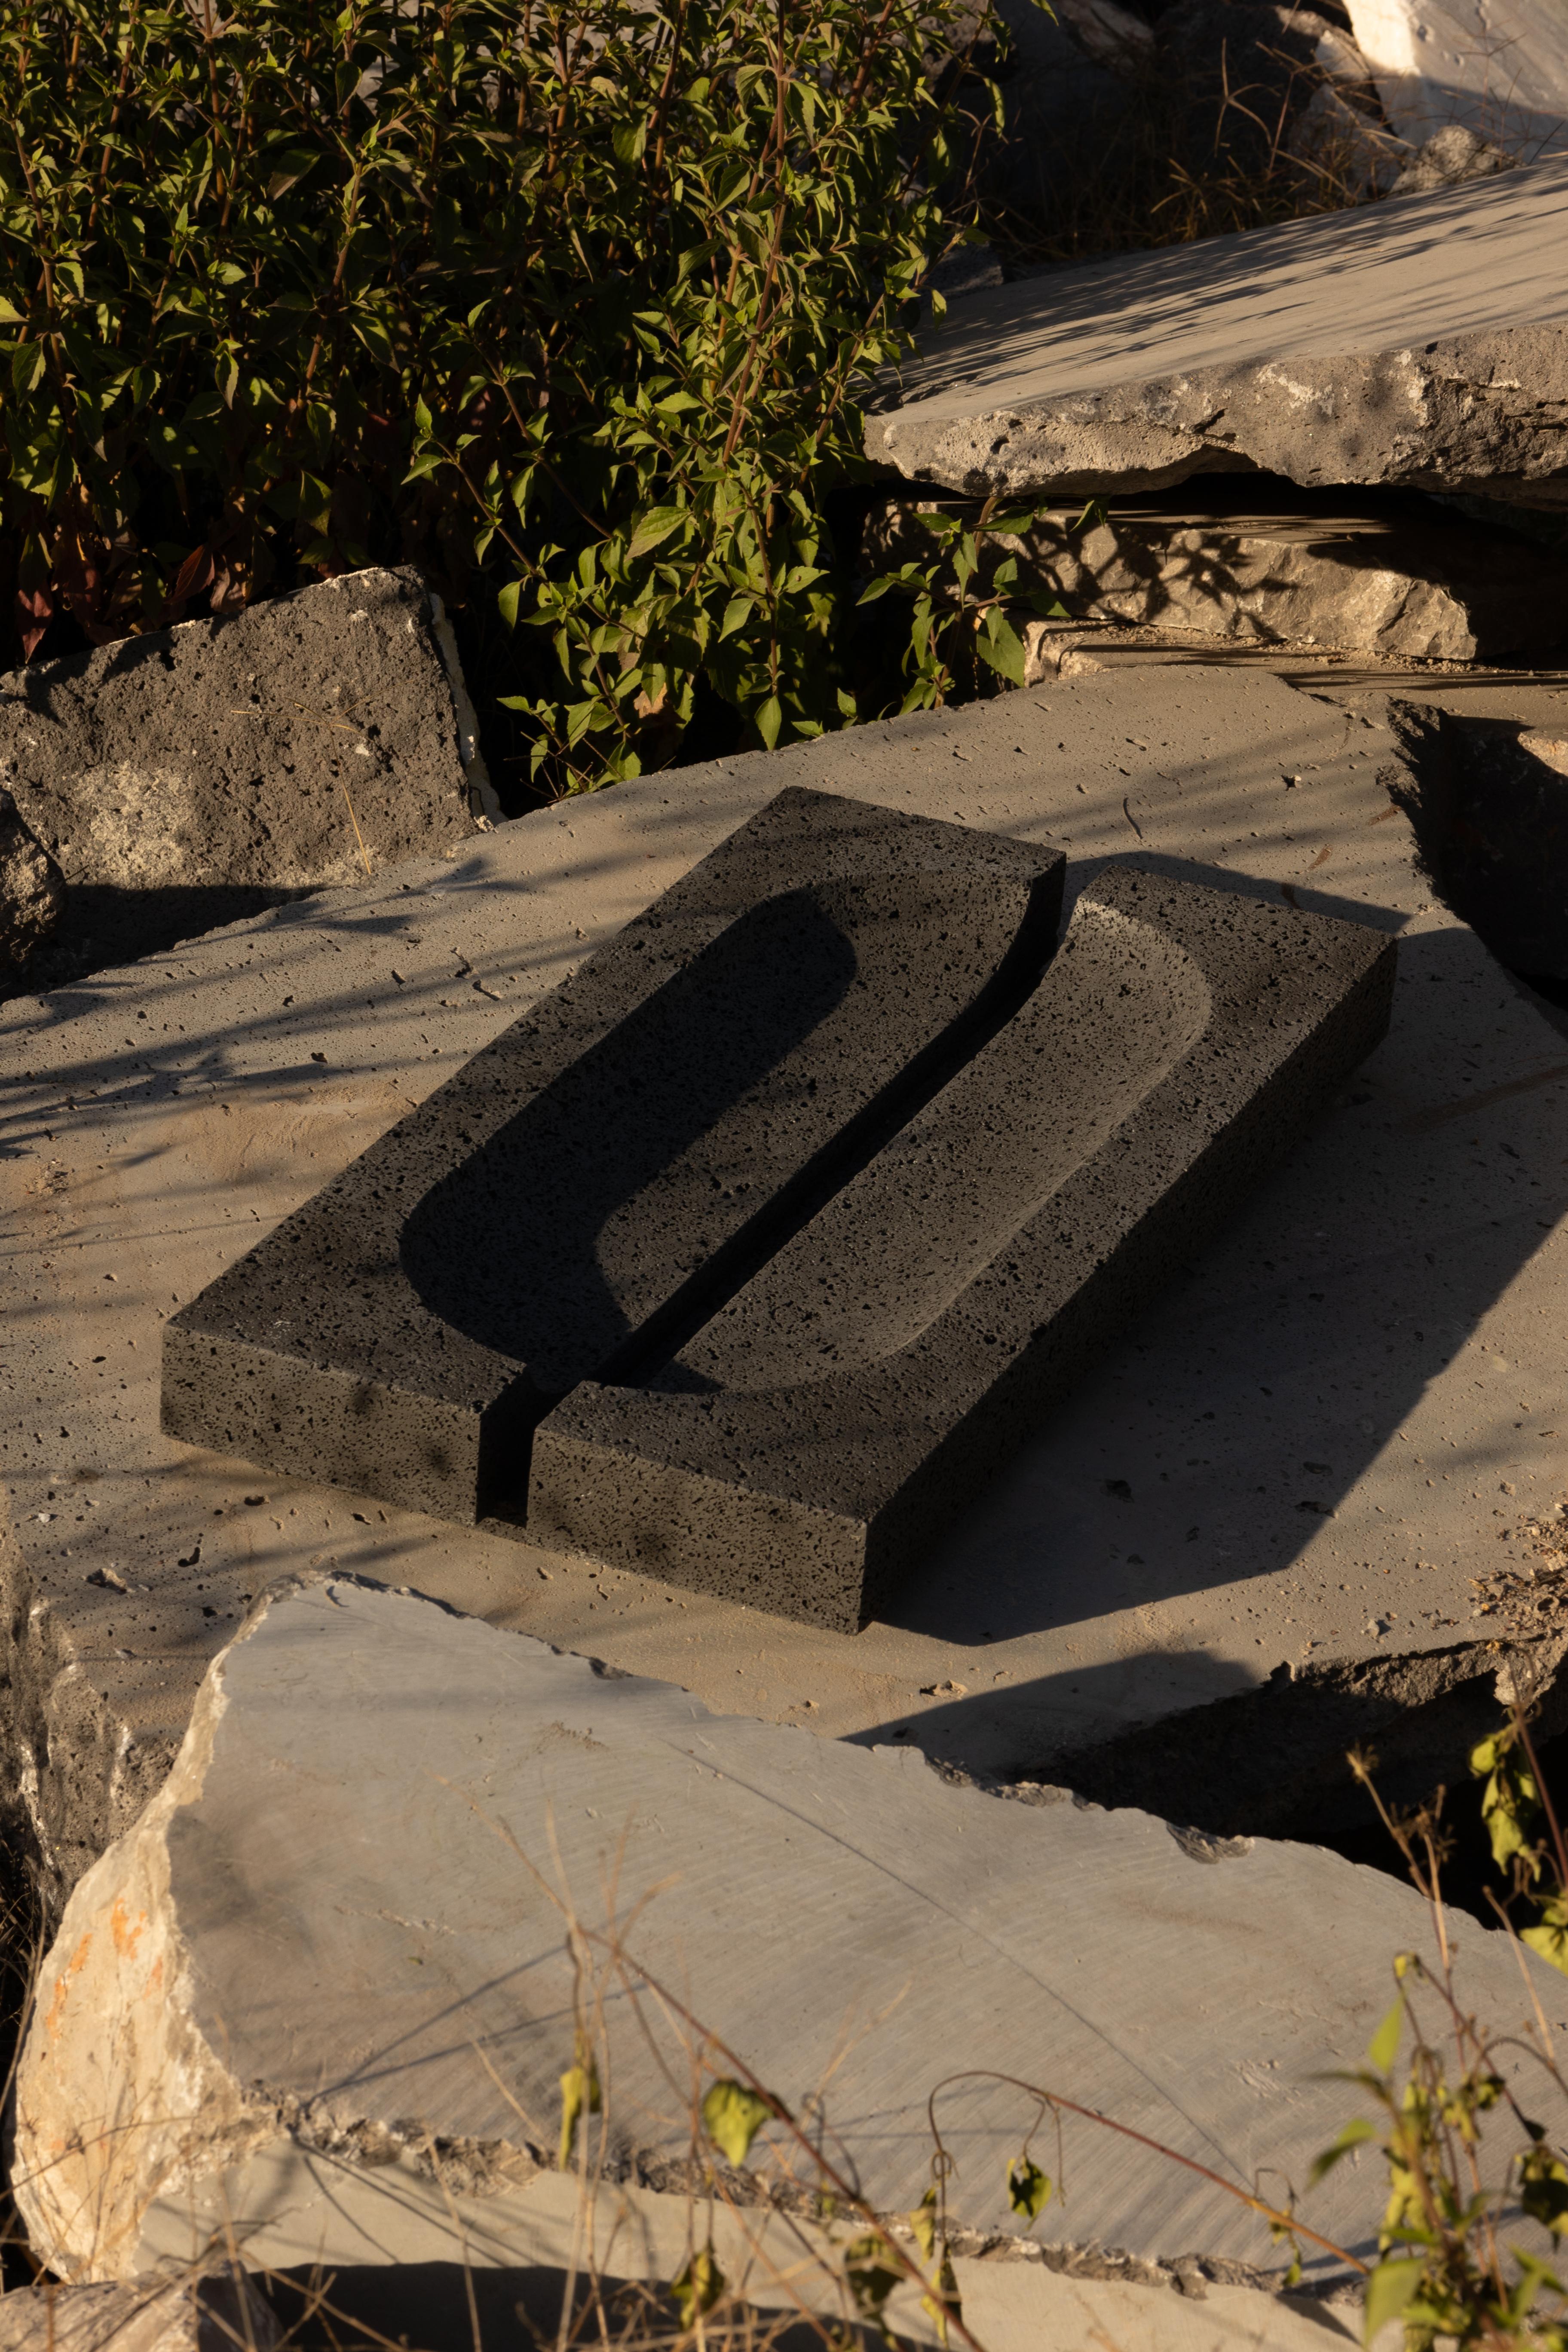 M_015 Lava Rock Trench Bowl by Monolith Studio
Signed and Numbered.
Dimensions: D 70 x W 35 x H 8 cm. 
Materials: Lava rock.

Available in travertine and lava rock. Please contact us. 

Monolith, founded in 2022 by Marc Personick, leans on solid